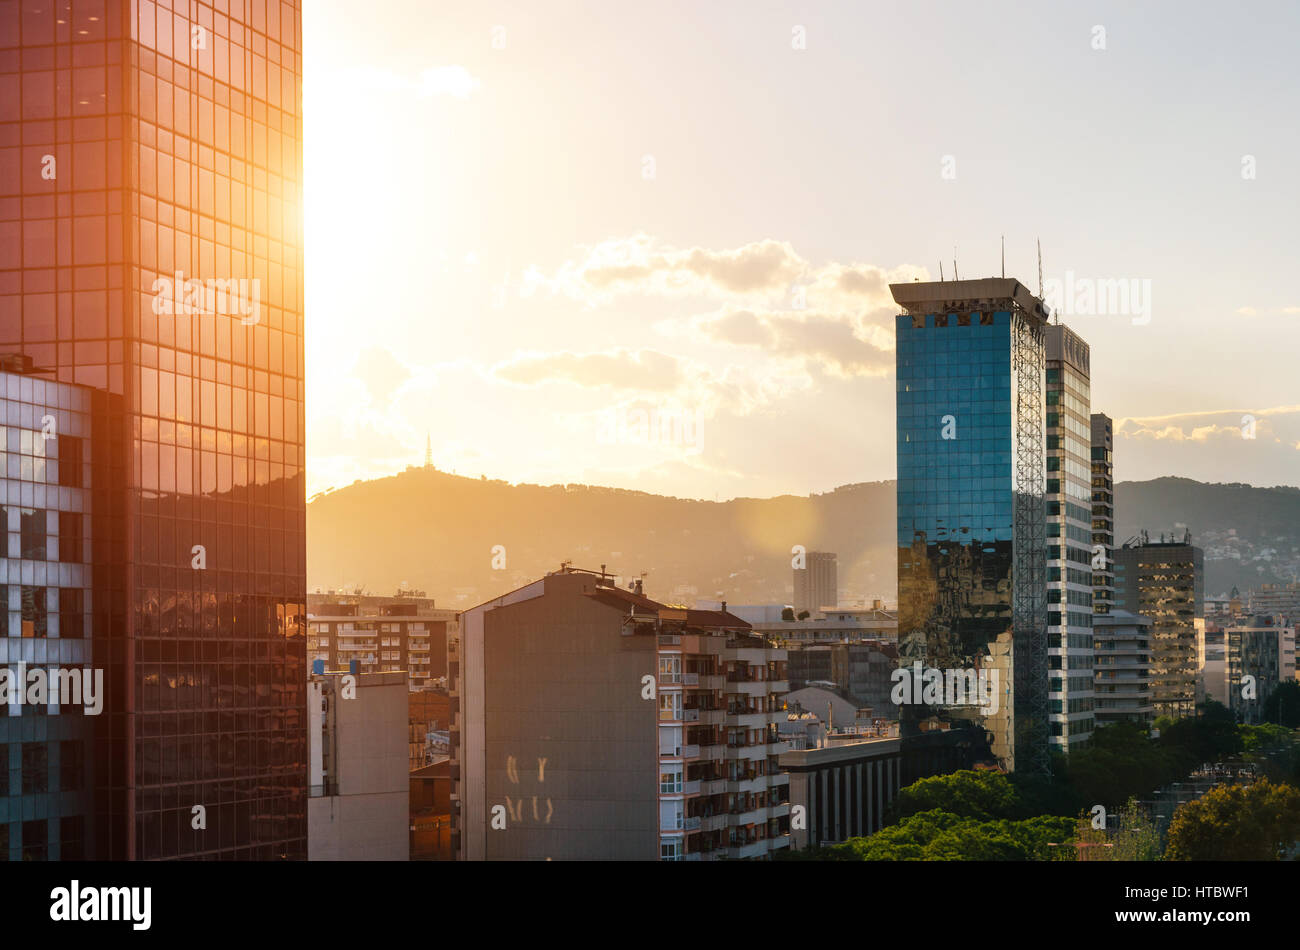 Barcelona, Catalonia, Spain - May 30, 2016: View of glass skyscrapers with reflection on Carrer de Tarragona Street near Spain square at sunset. Stock Photo